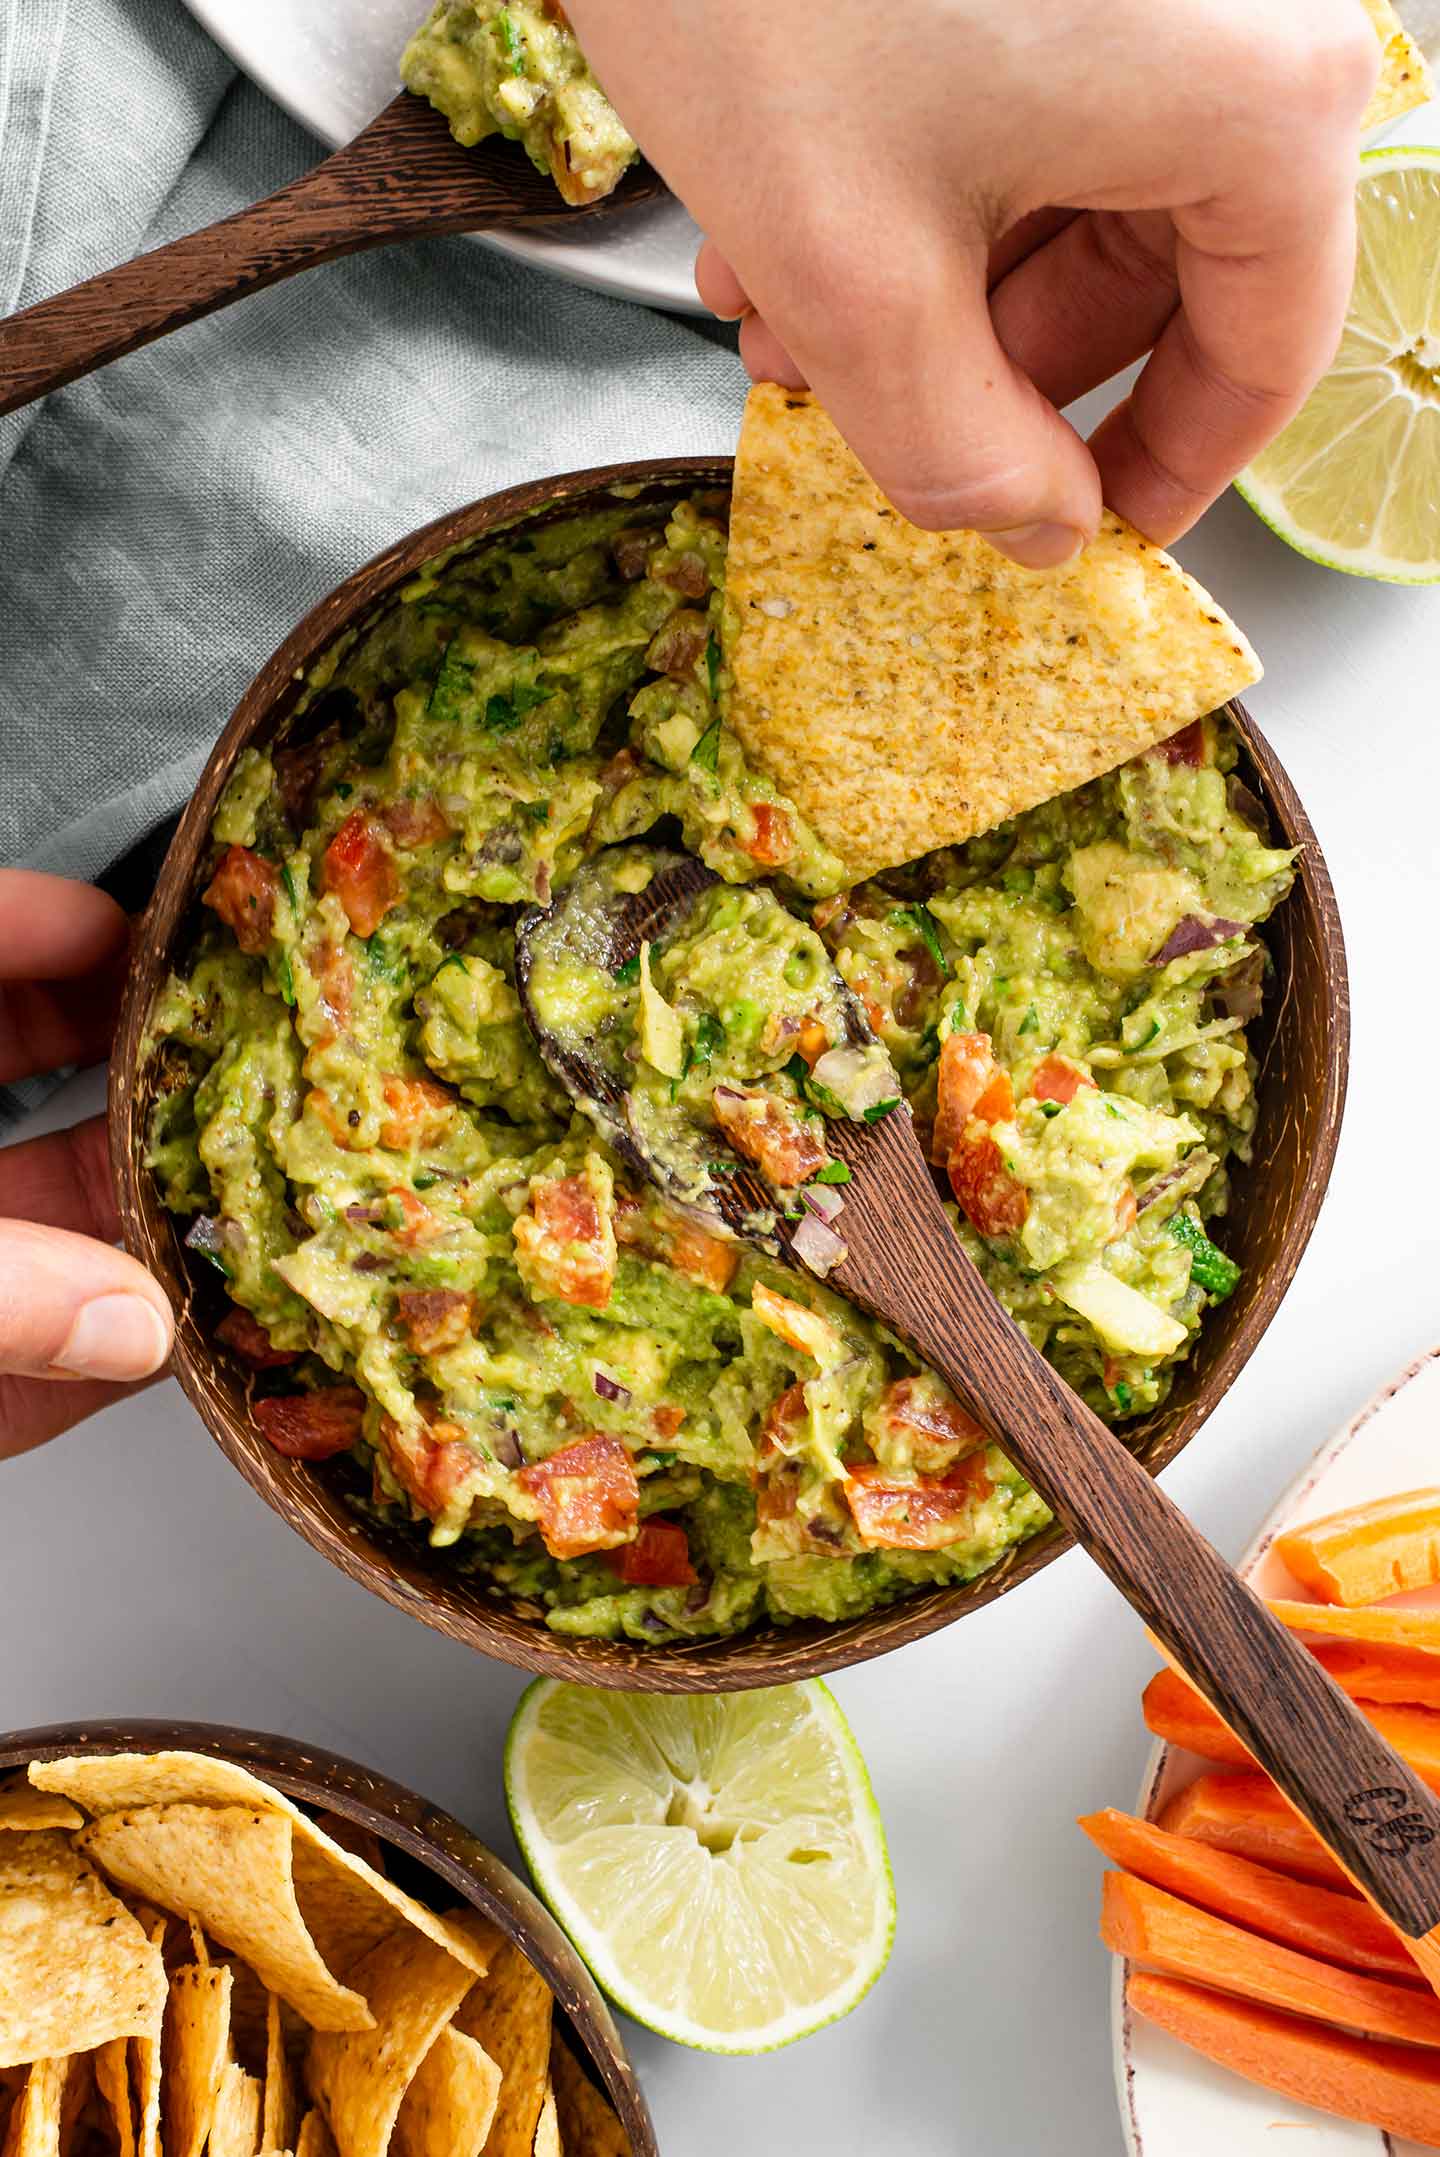 Top down view of a hand scooping timely guacamole from the bowl and onto a tortilla chip. Lime halves, carrot sticks, and more tortilla chips surround the guacamole.